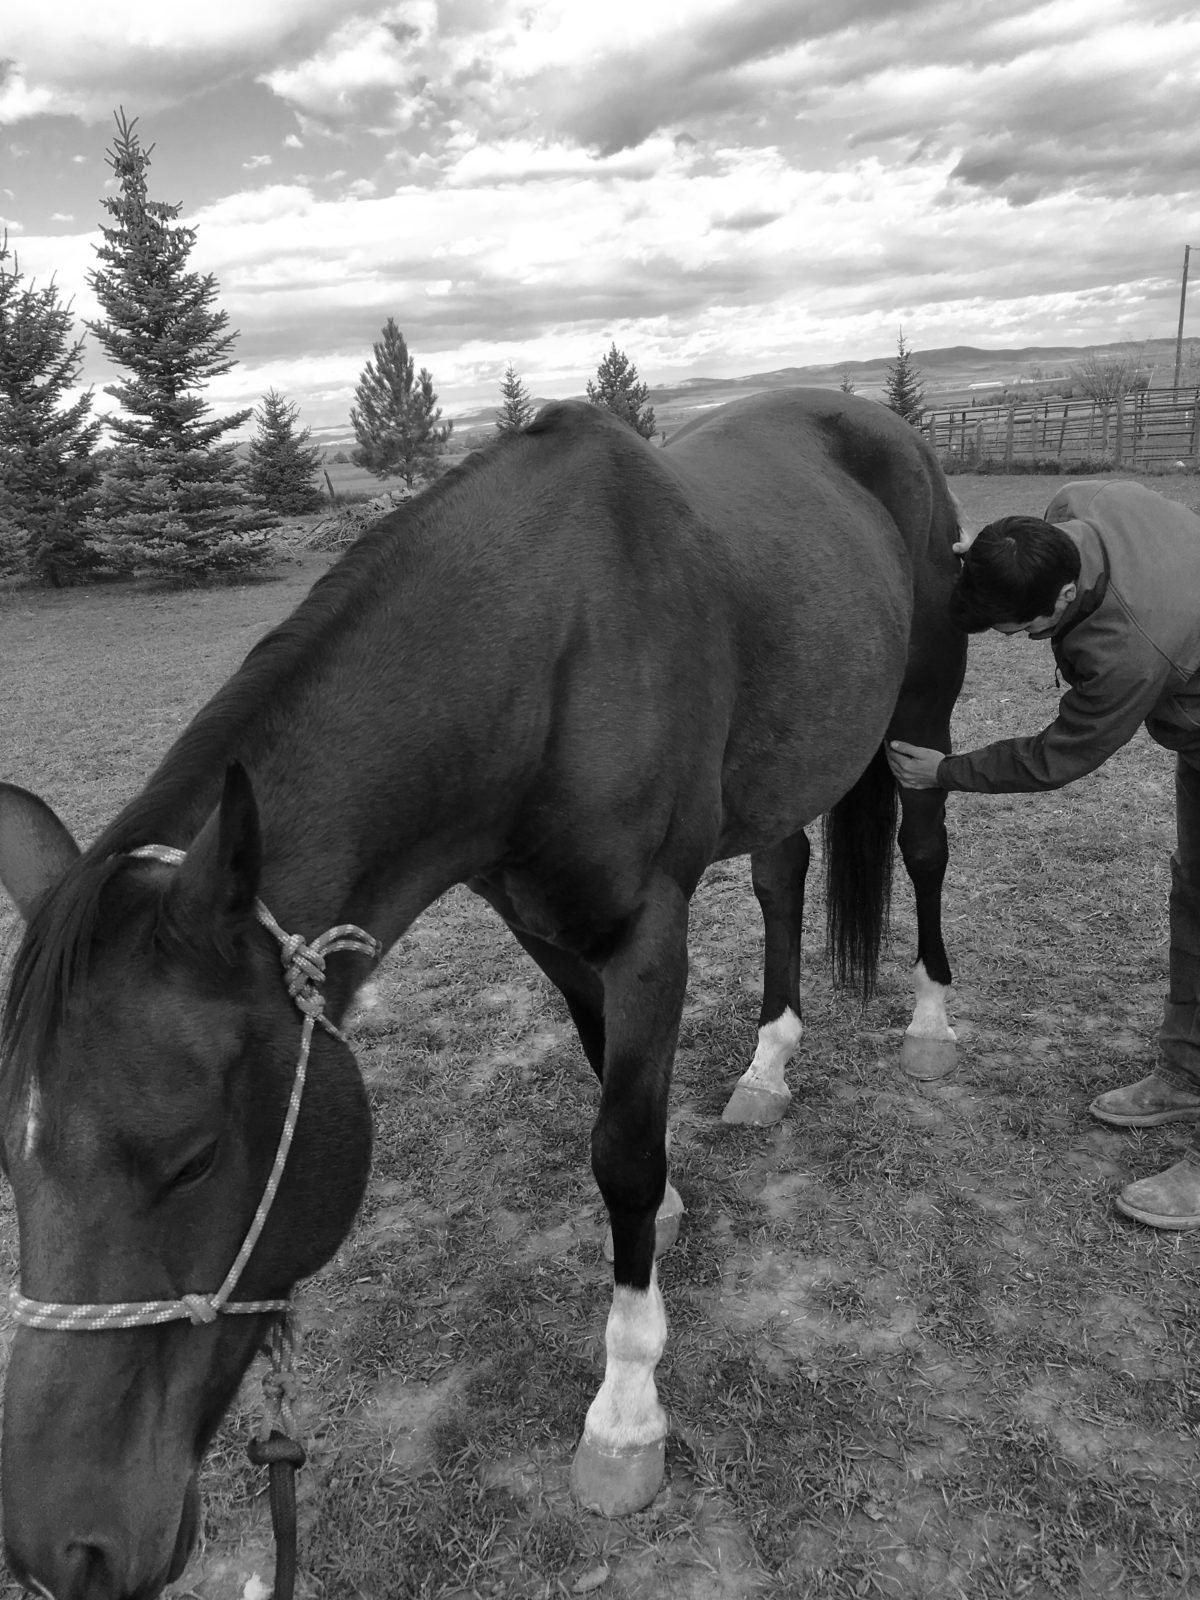 Questions of education: how to instill good manners in a horse ... rump?